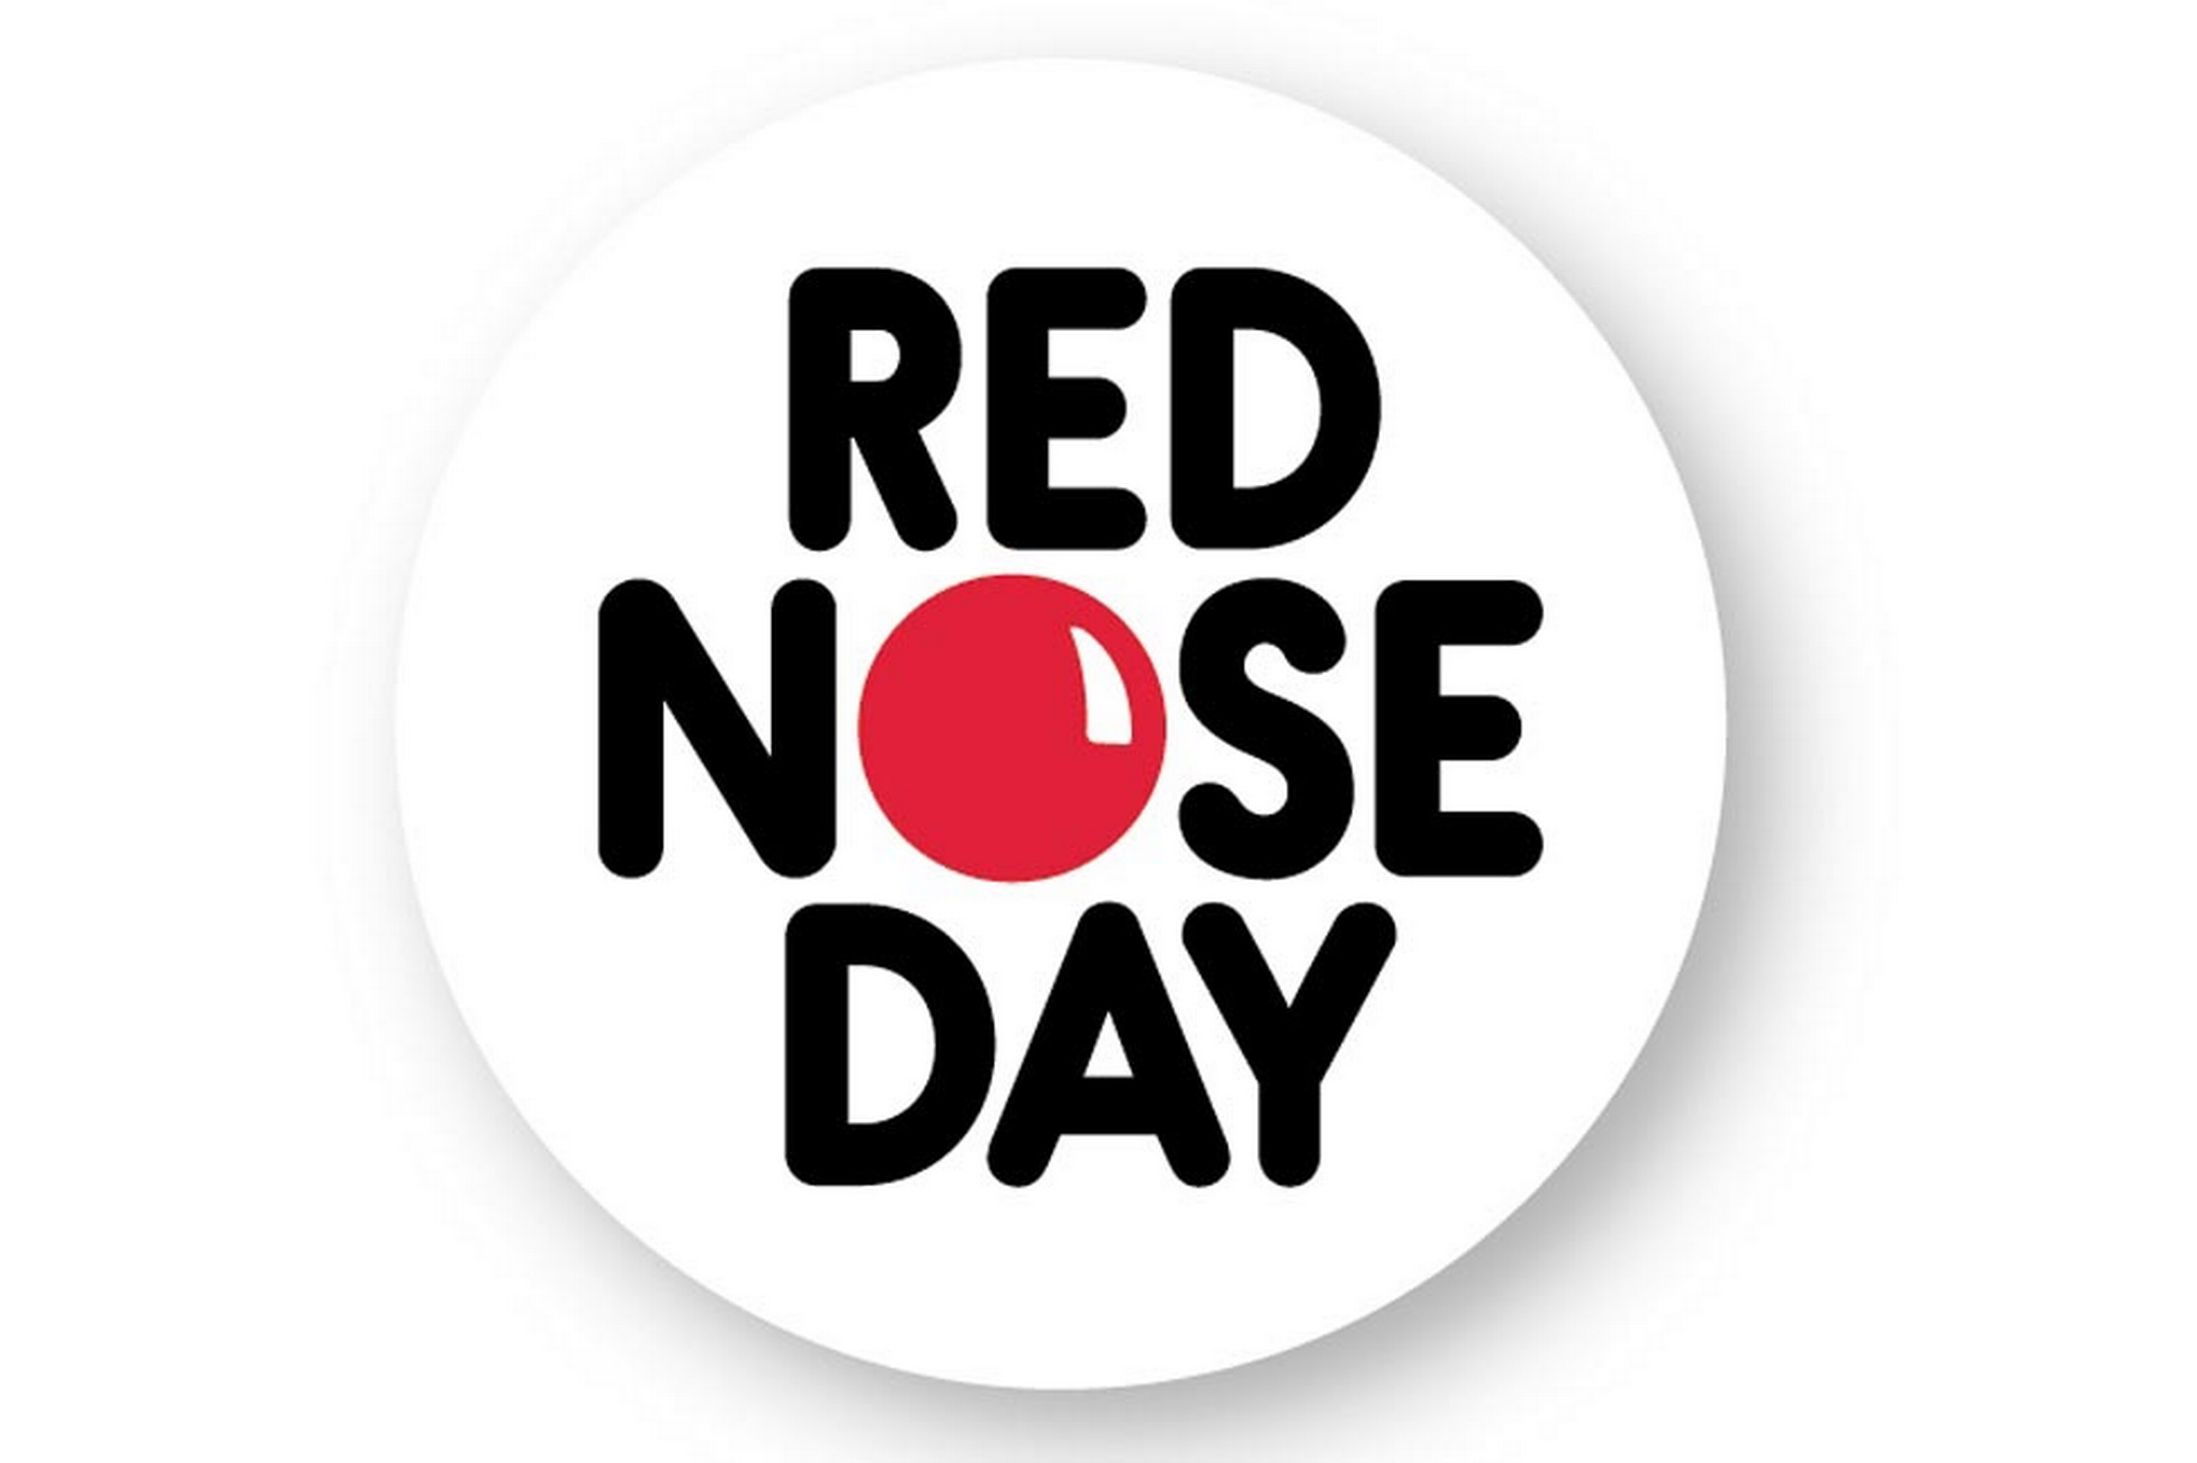 10 Amazing Facts About Comic Relief's Red Nose Day - The List Love